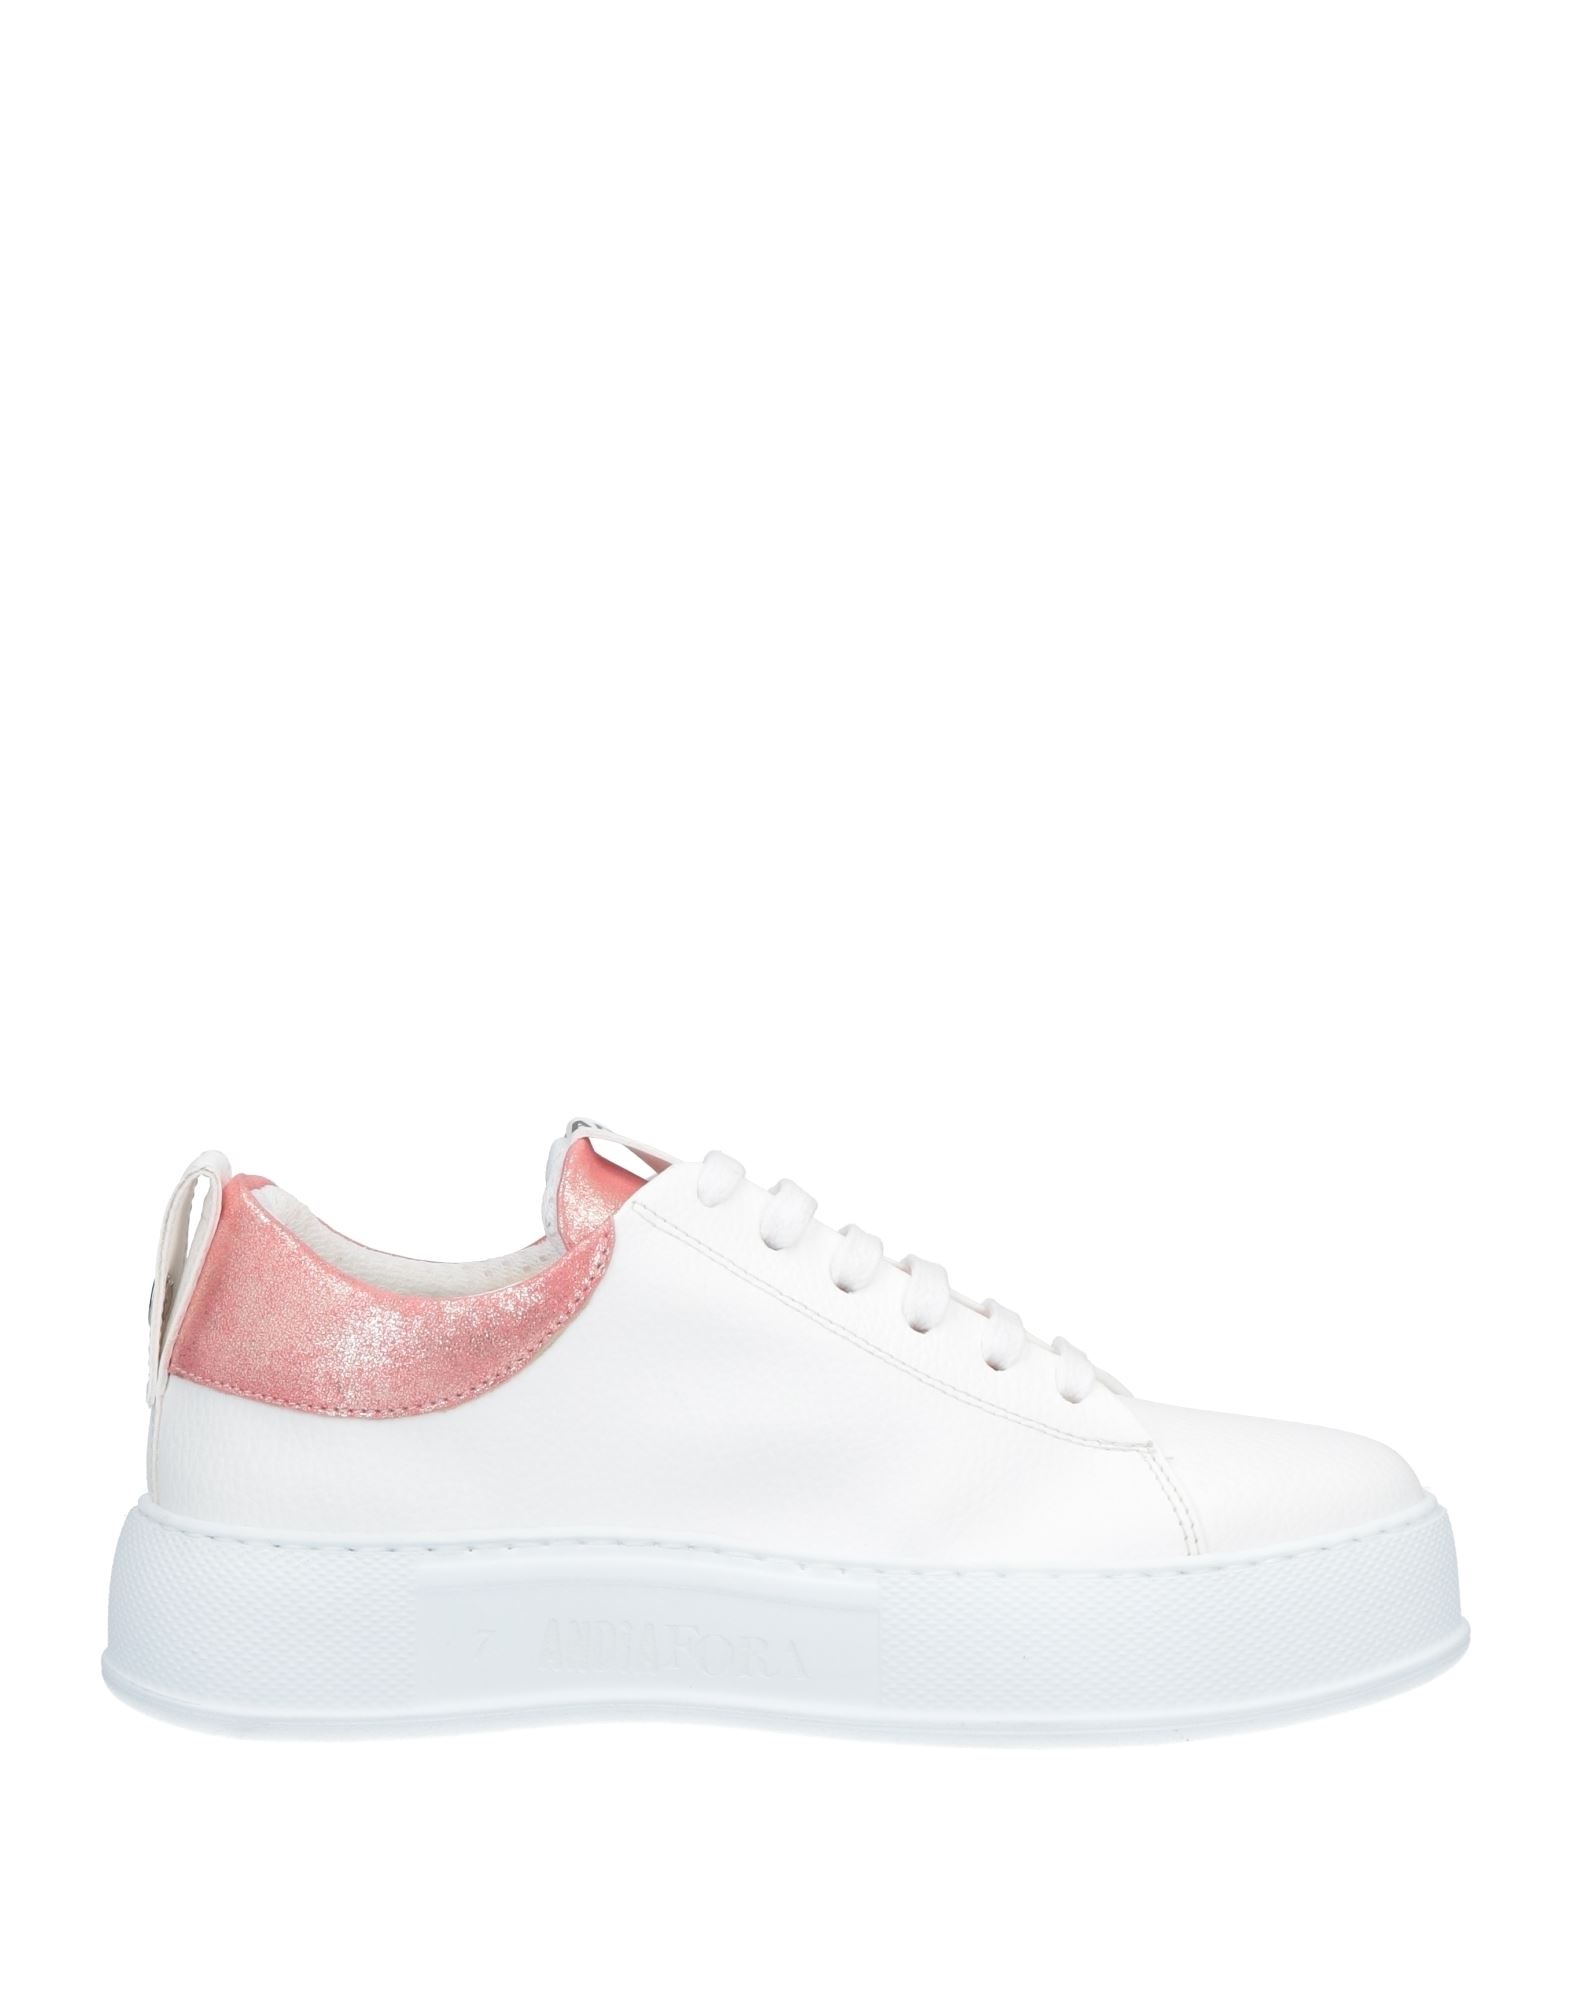 Andìa Fora Woman Sneakers White Size 5 Soft Leather